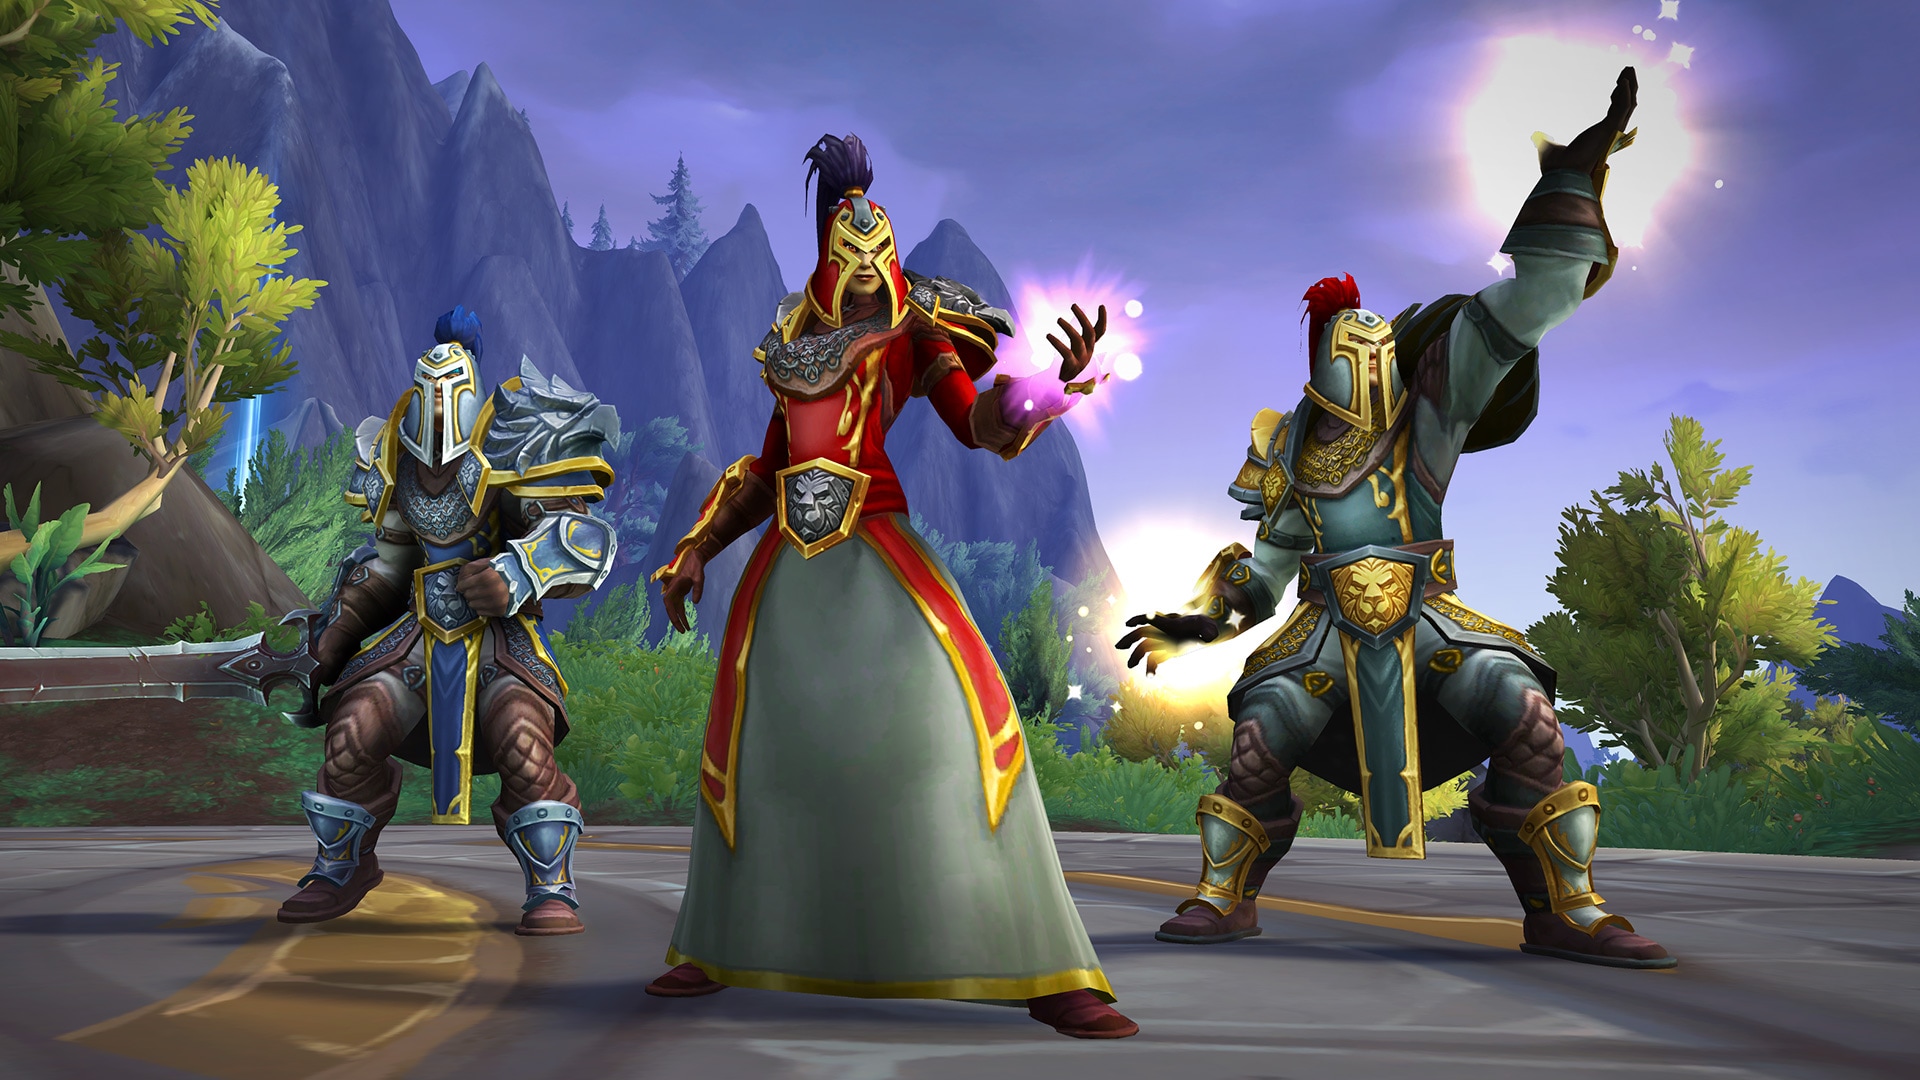 Three variations of Human Armor. (Left to Right) Classic Blue and Gold Armor,Red and gray robe With classic Human style helm, and Green Leather style Armor. All three helms have coordinating plumes from the helm.